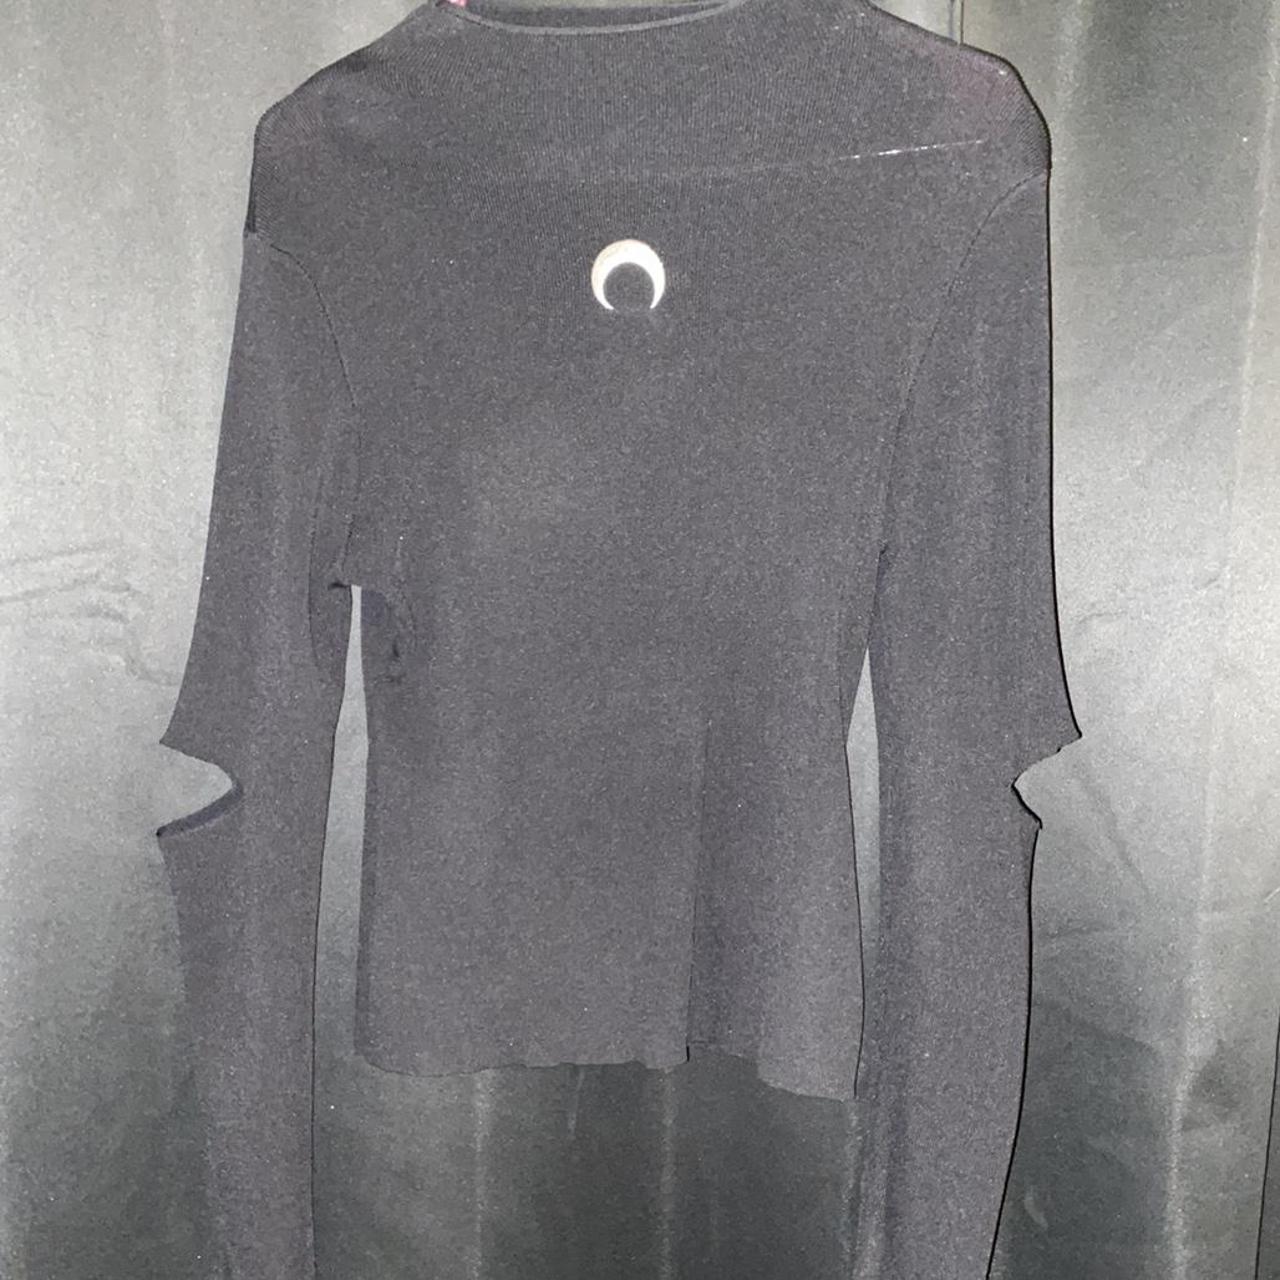 Product Image 1 - 🐈‍⬛ Kitty Monnbeam Top 🐈‍⬛